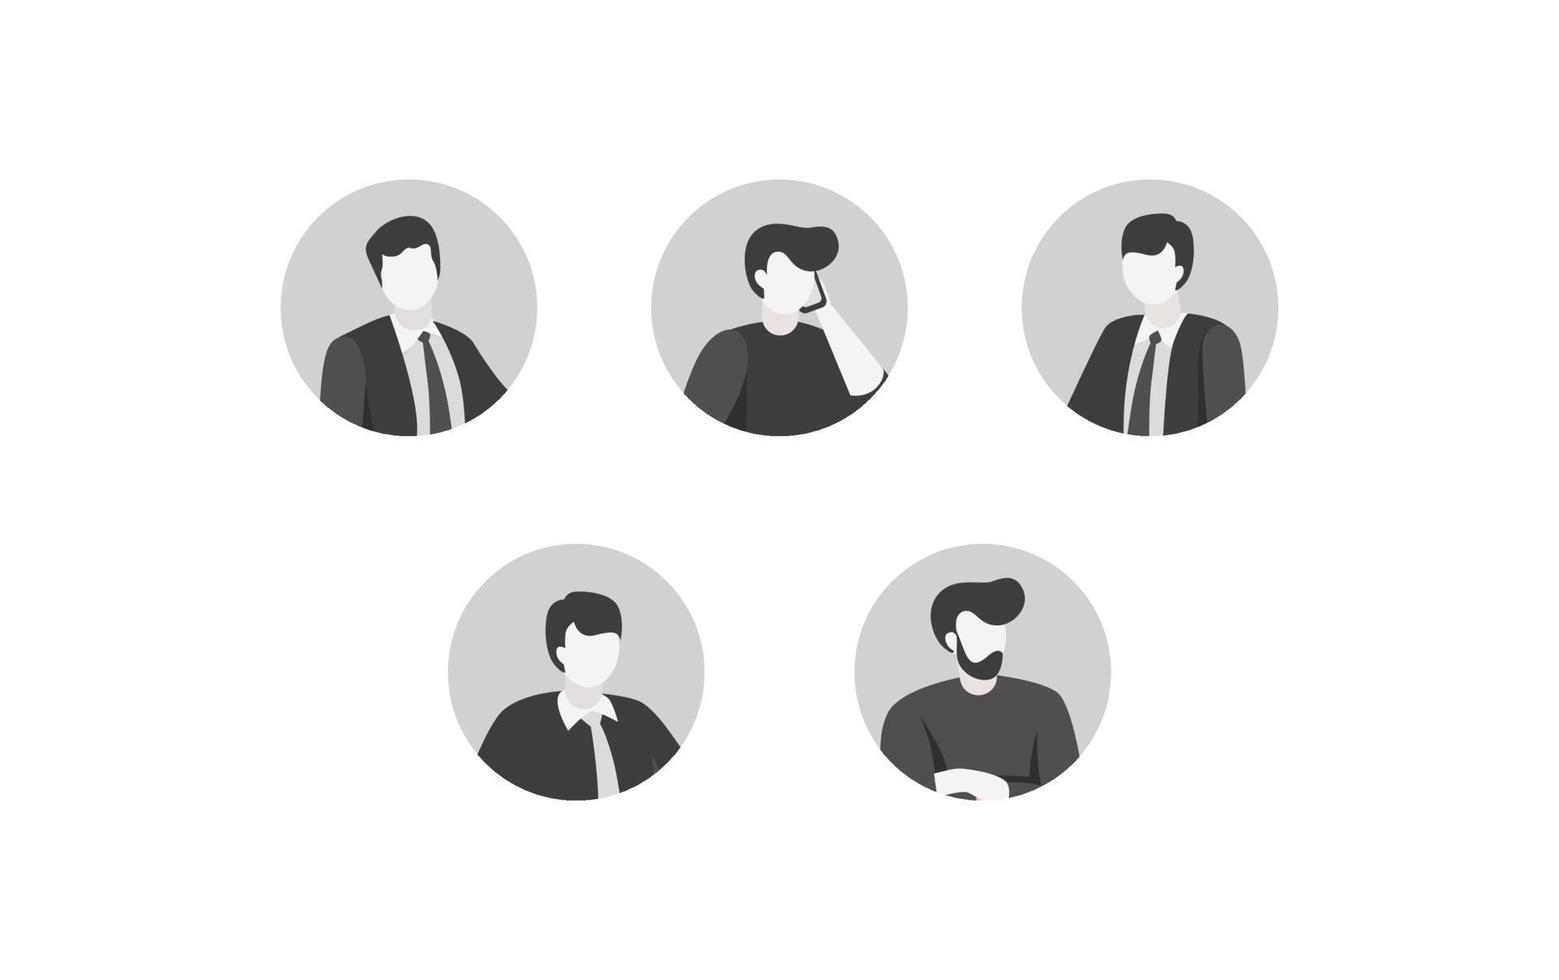 Business monochrome avatars. Business characters in formal jackets and ties with stylish hairstyles. vector